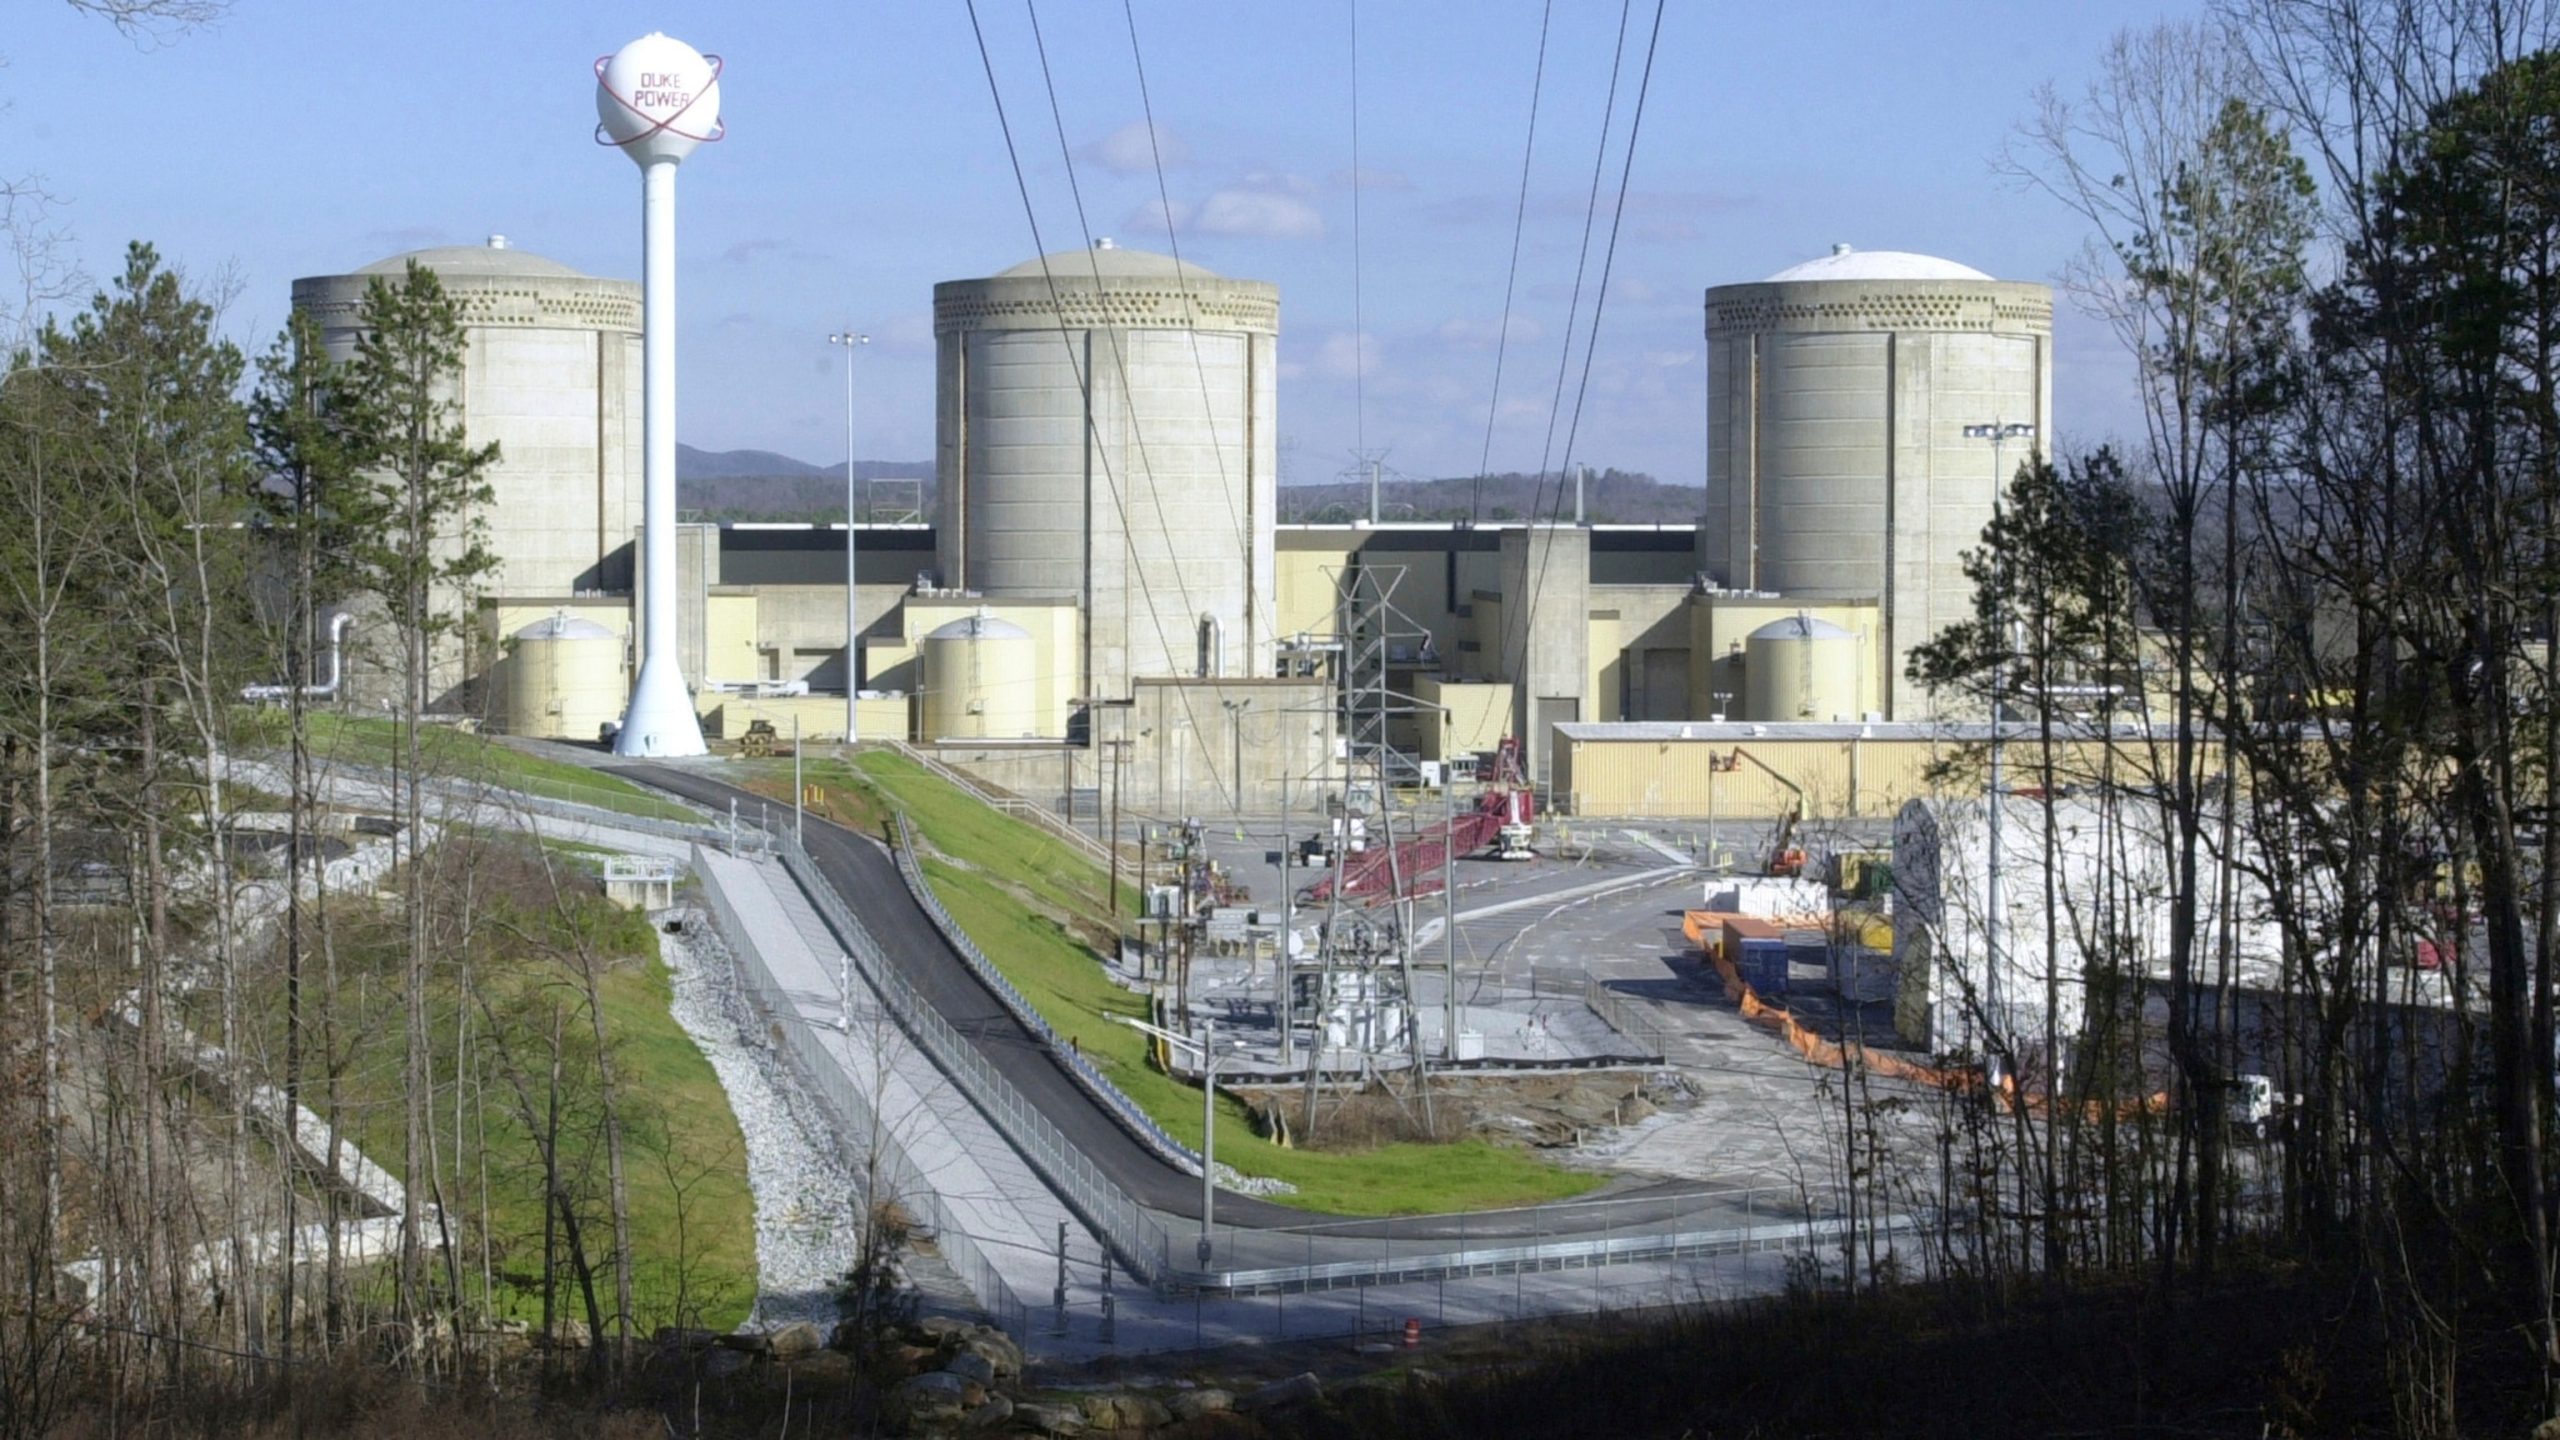 Police are conducting an investigation into an incident at a nuclear plant in South Carolina following a security breach involving a car driving through fences.